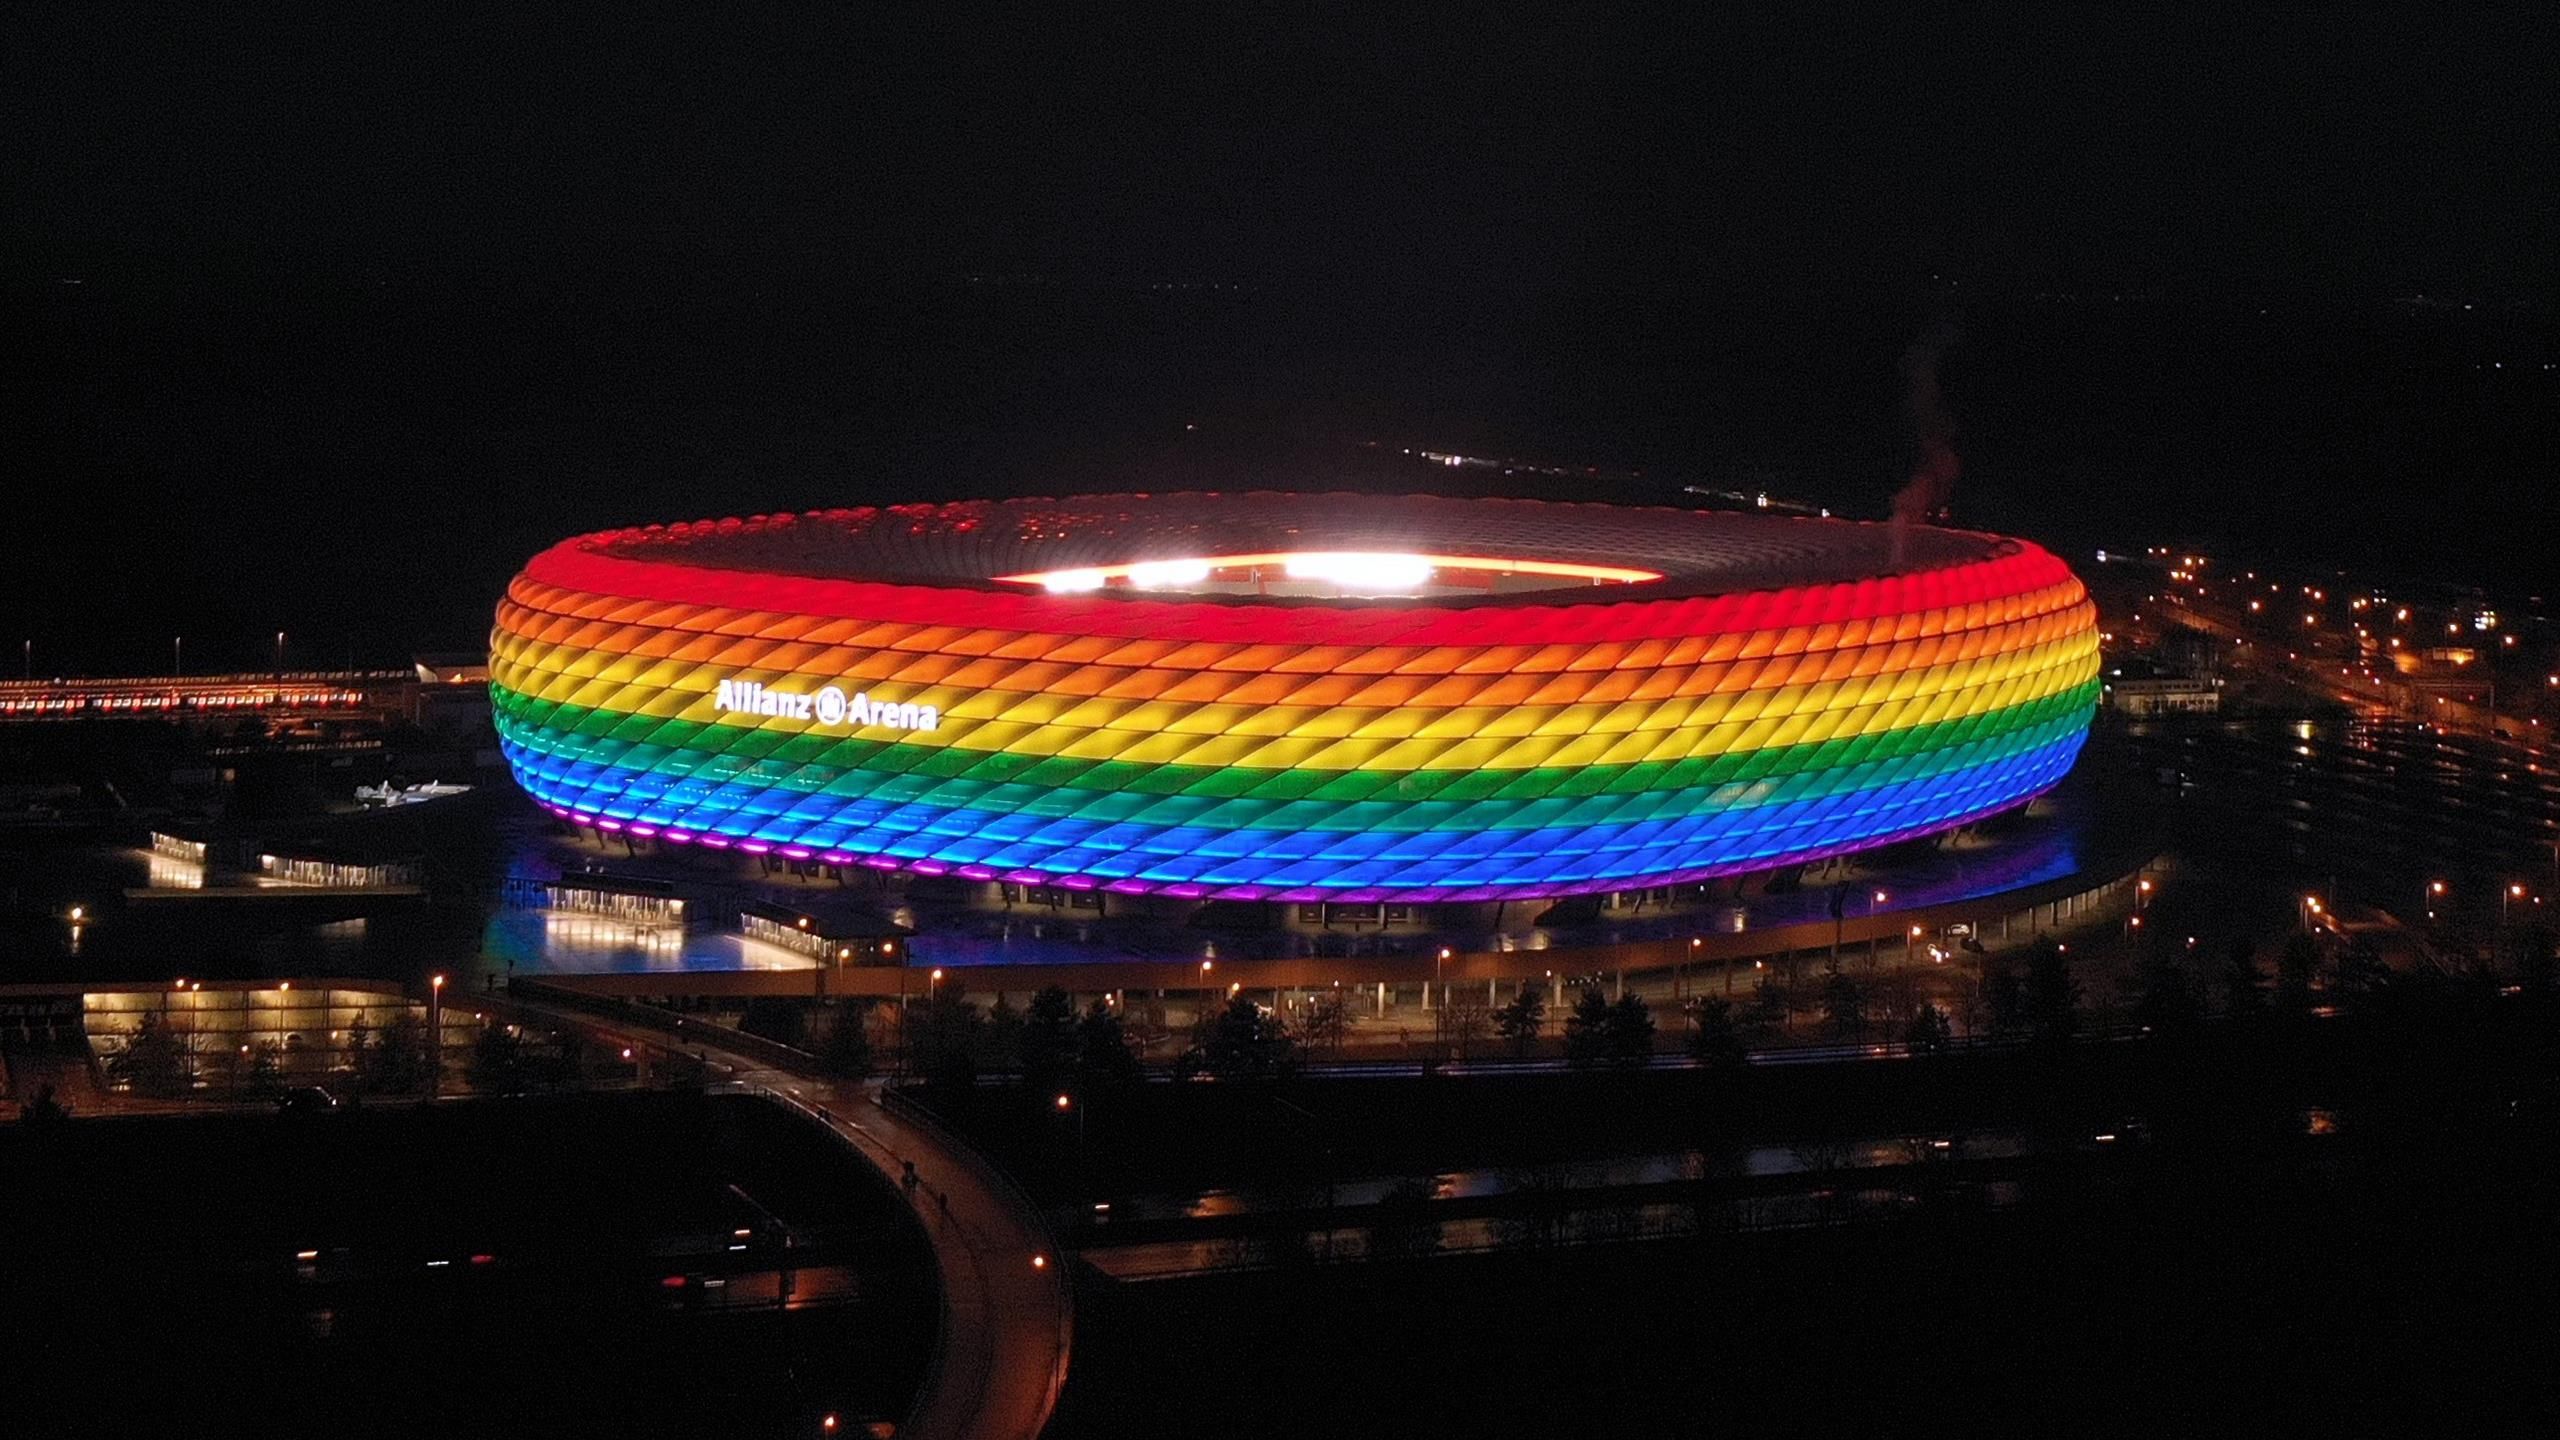 Calls to light Allianz Arena in rainbow colours after Hungary anti-LGBTQ+  law, Euro 2020